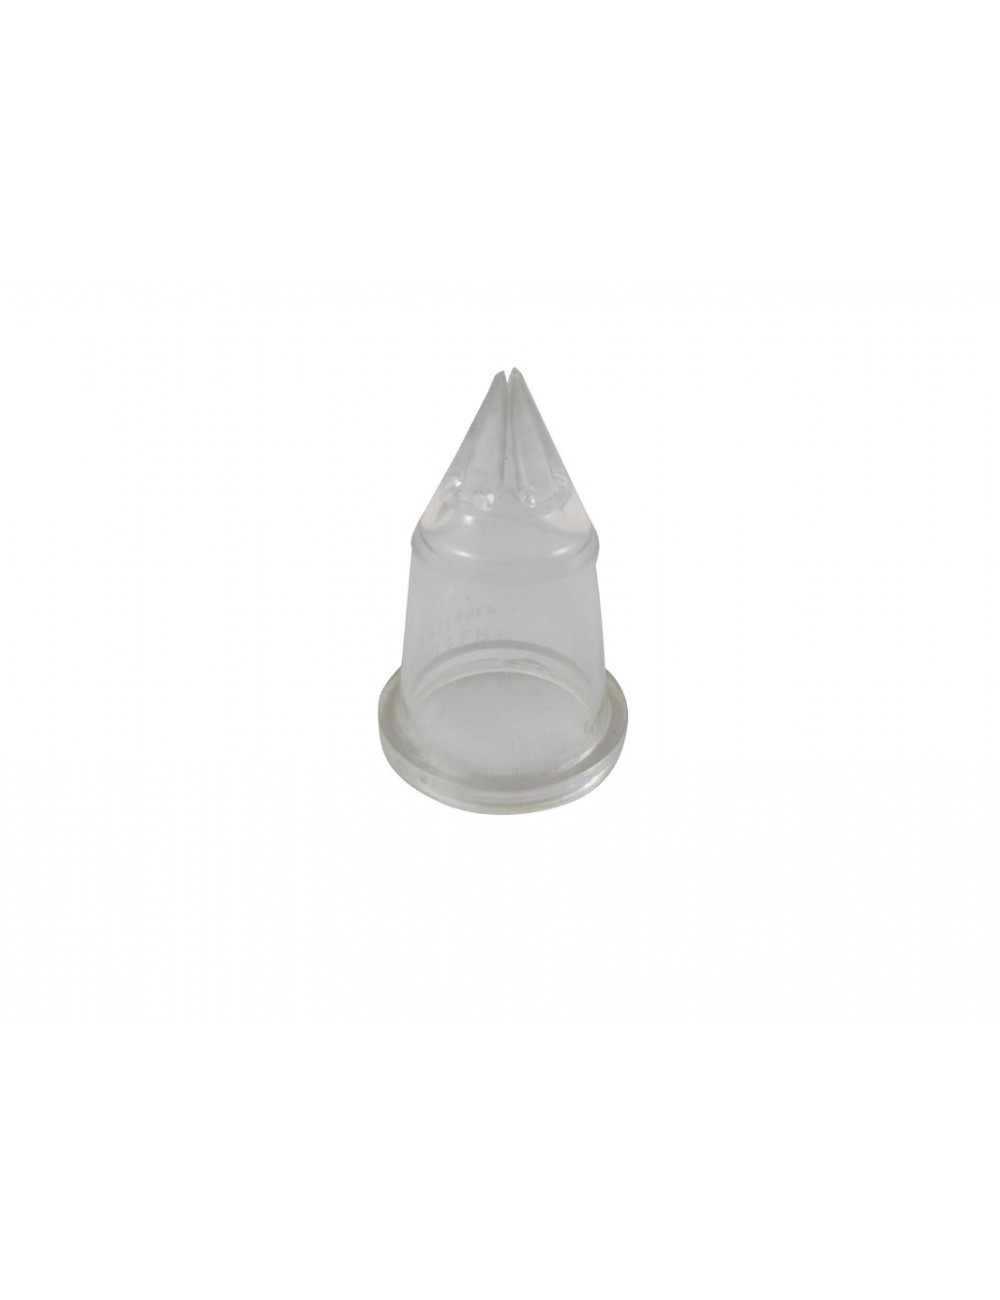 FLUTED NOZZLE A - COPOLYESTER